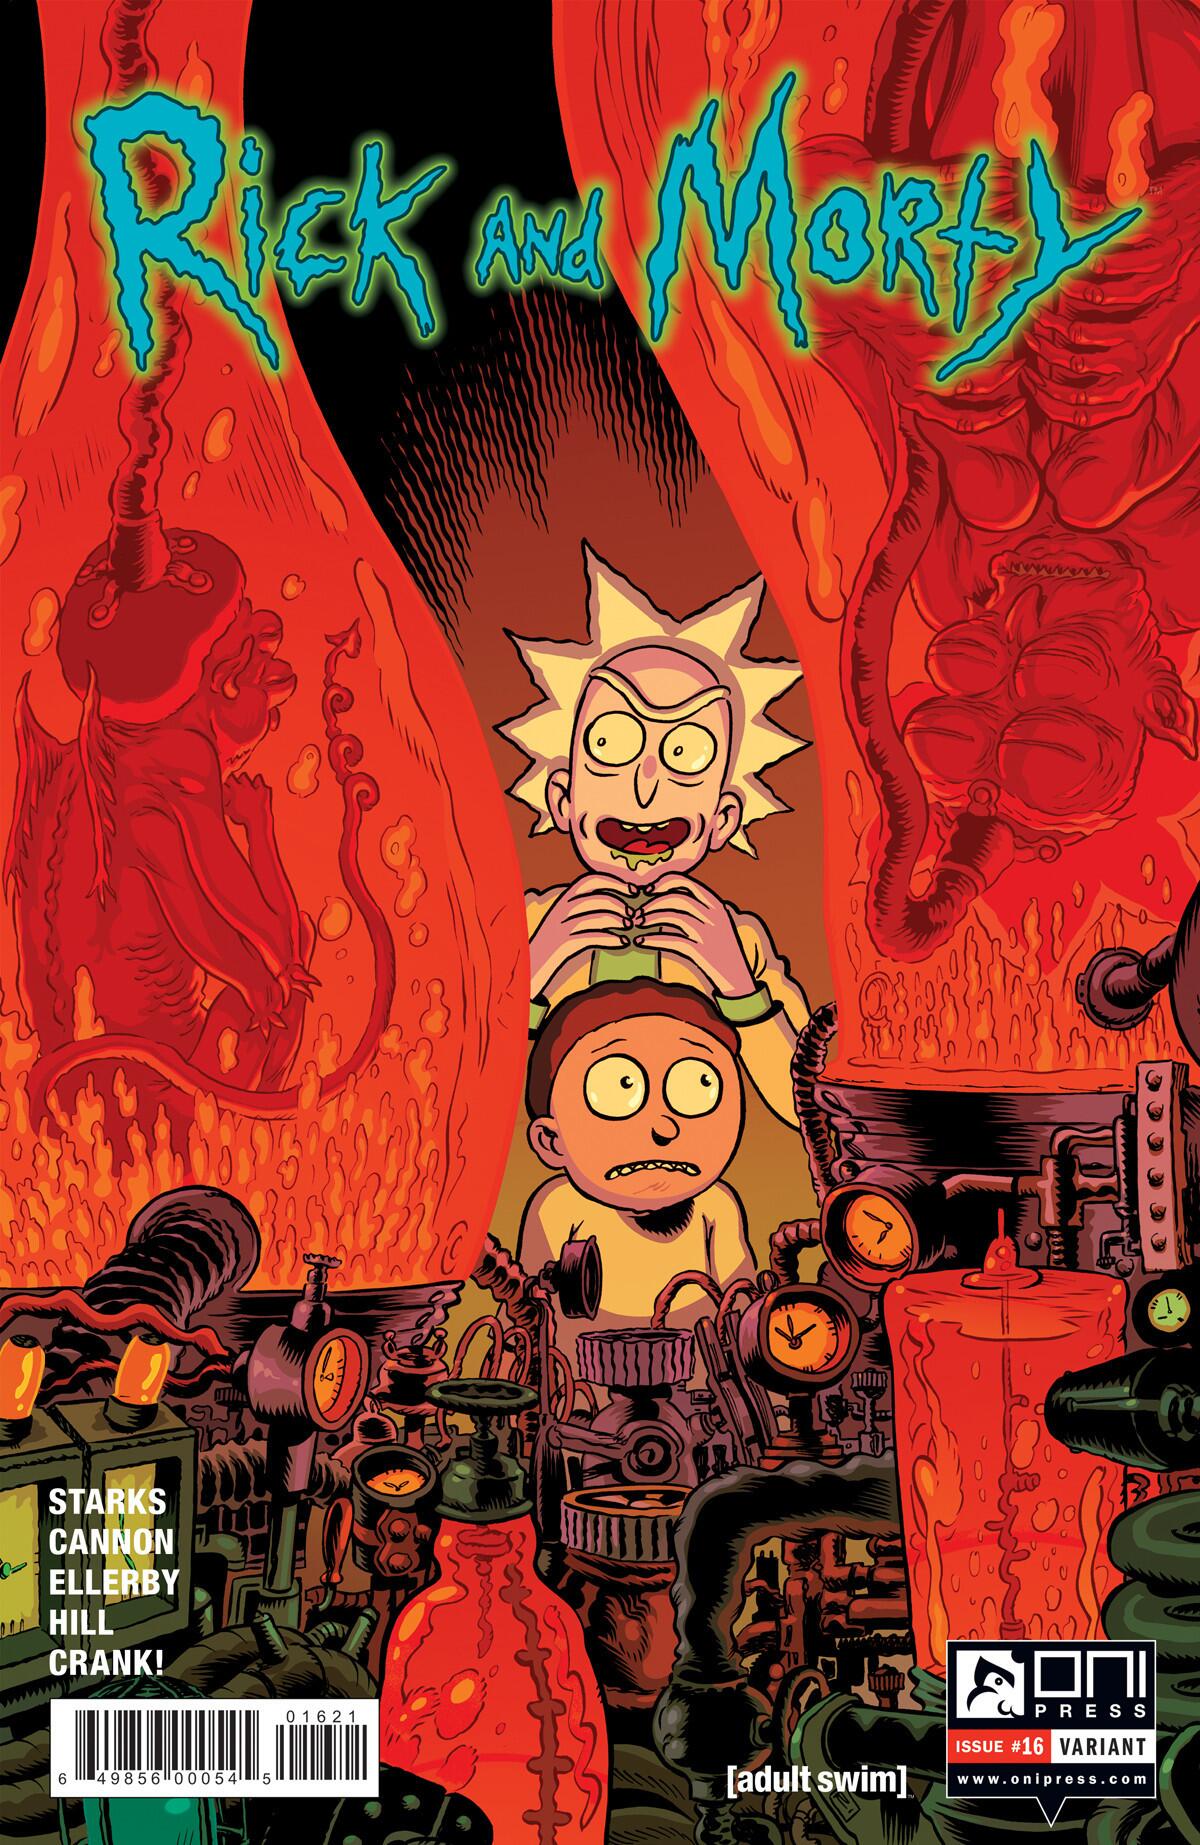 The variant cover for "Rick and Morty" No. 16 by Troy Nixey and Dave McCaig.